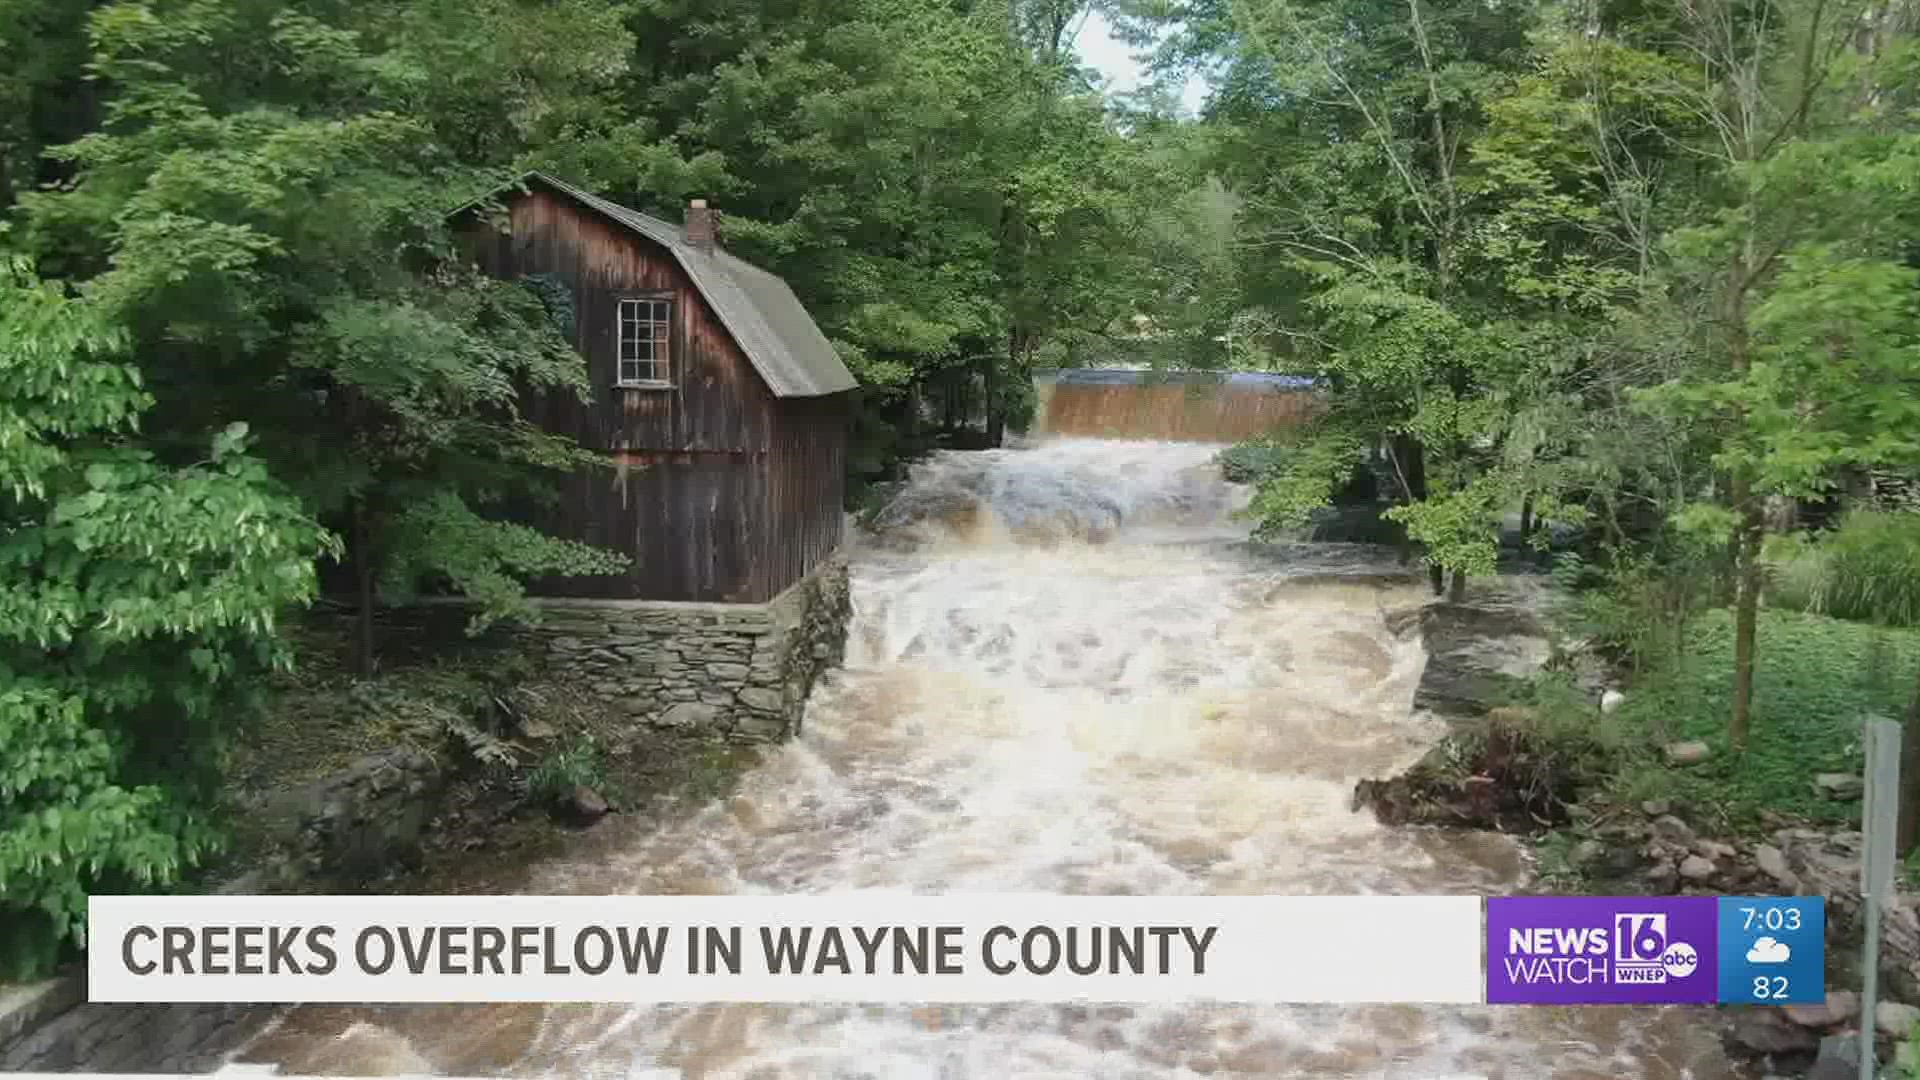 Several inches of rain caused creeks to overflow and roads to close in Wayne County. Newswatch 16's Courtney Harrison found folks trying to navigate the floodwaters.